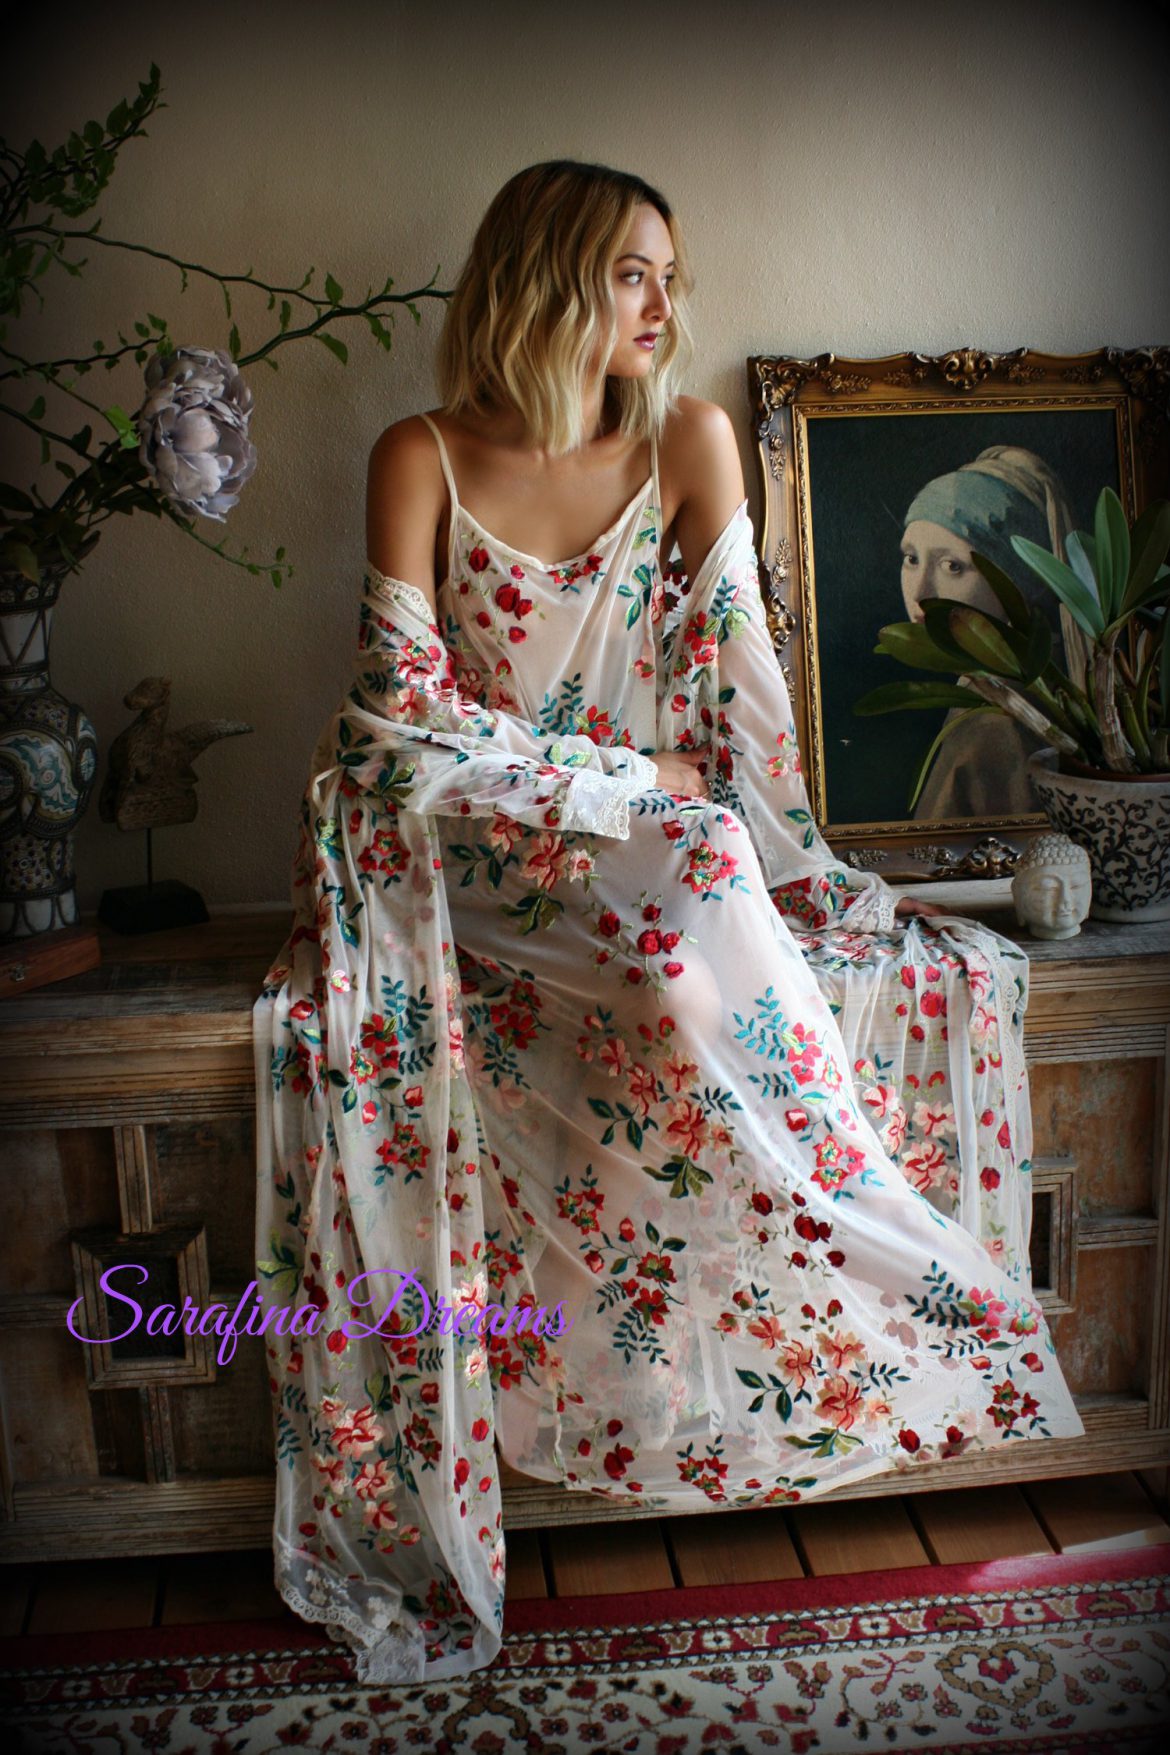 sarafina dreams floral sheer long nightgown and robe set | Esty Lingerie